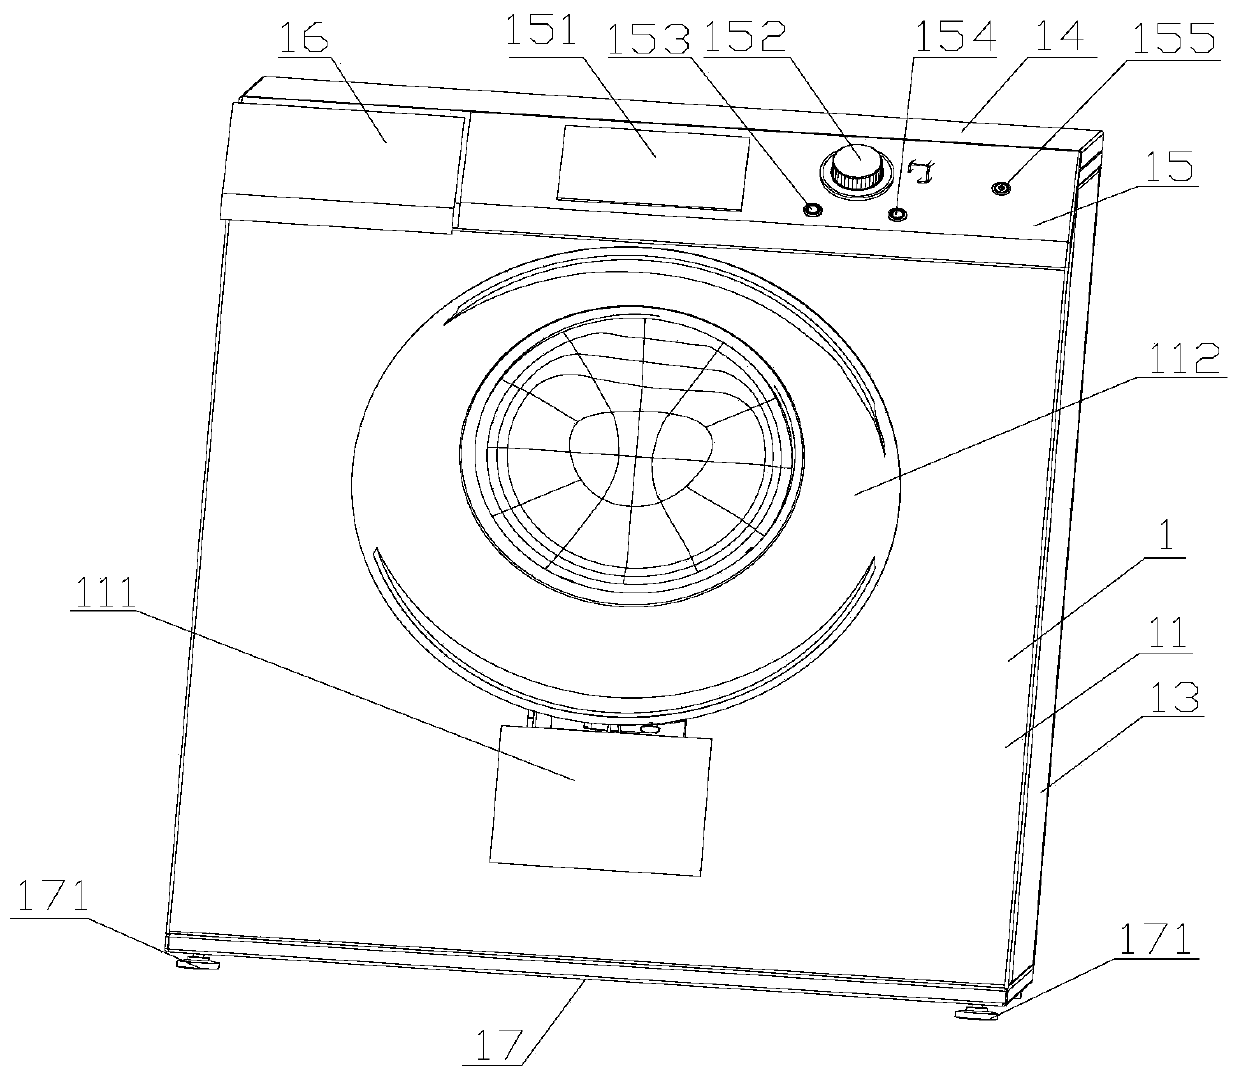 Integrated dry- and wet-cleaning washer housing convenient to maintain